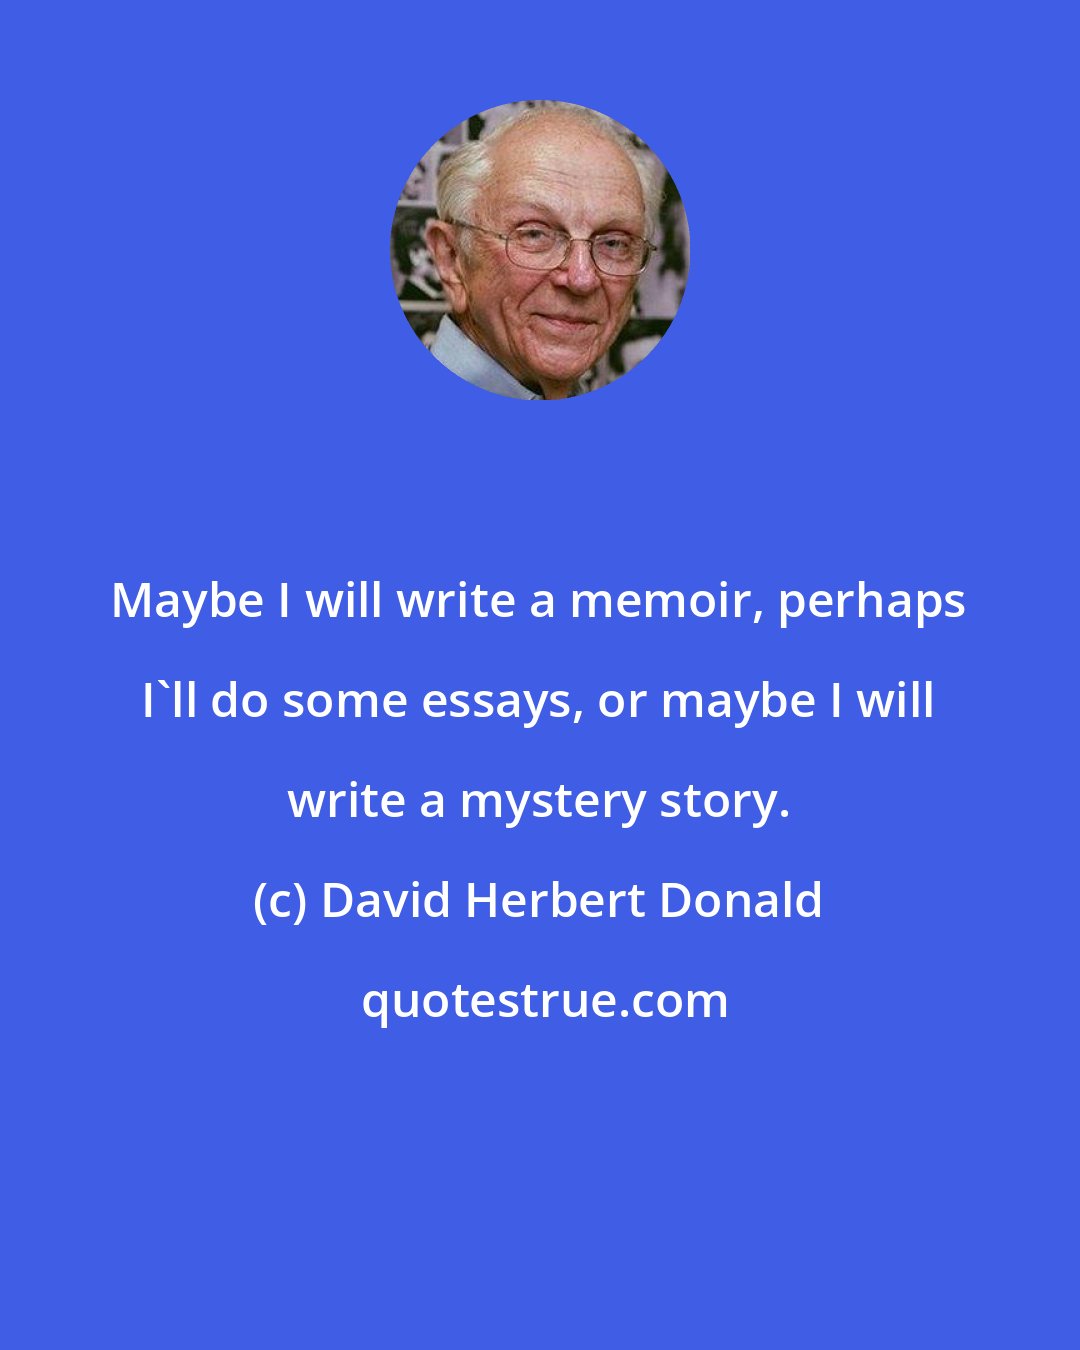 David Herbert Donald: Maybe I will write a memoir, perhaps I'll do some essays, or maybe I will write a mystery story.